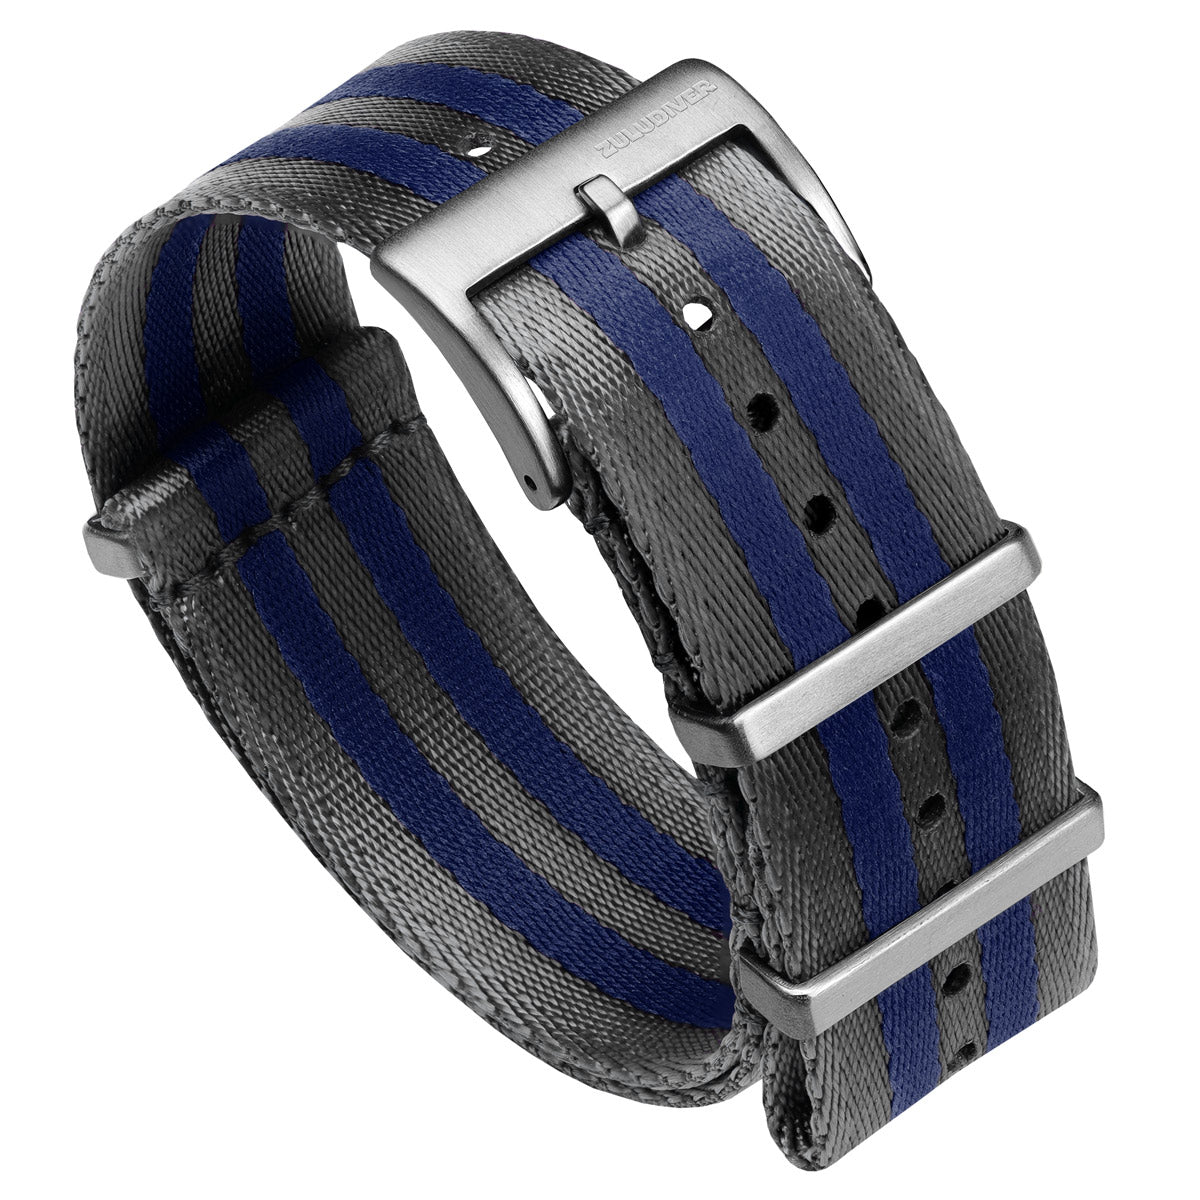 Premium NATO watch straps, grey and blue striped seat belt nylon material, with satin hardware, white background image